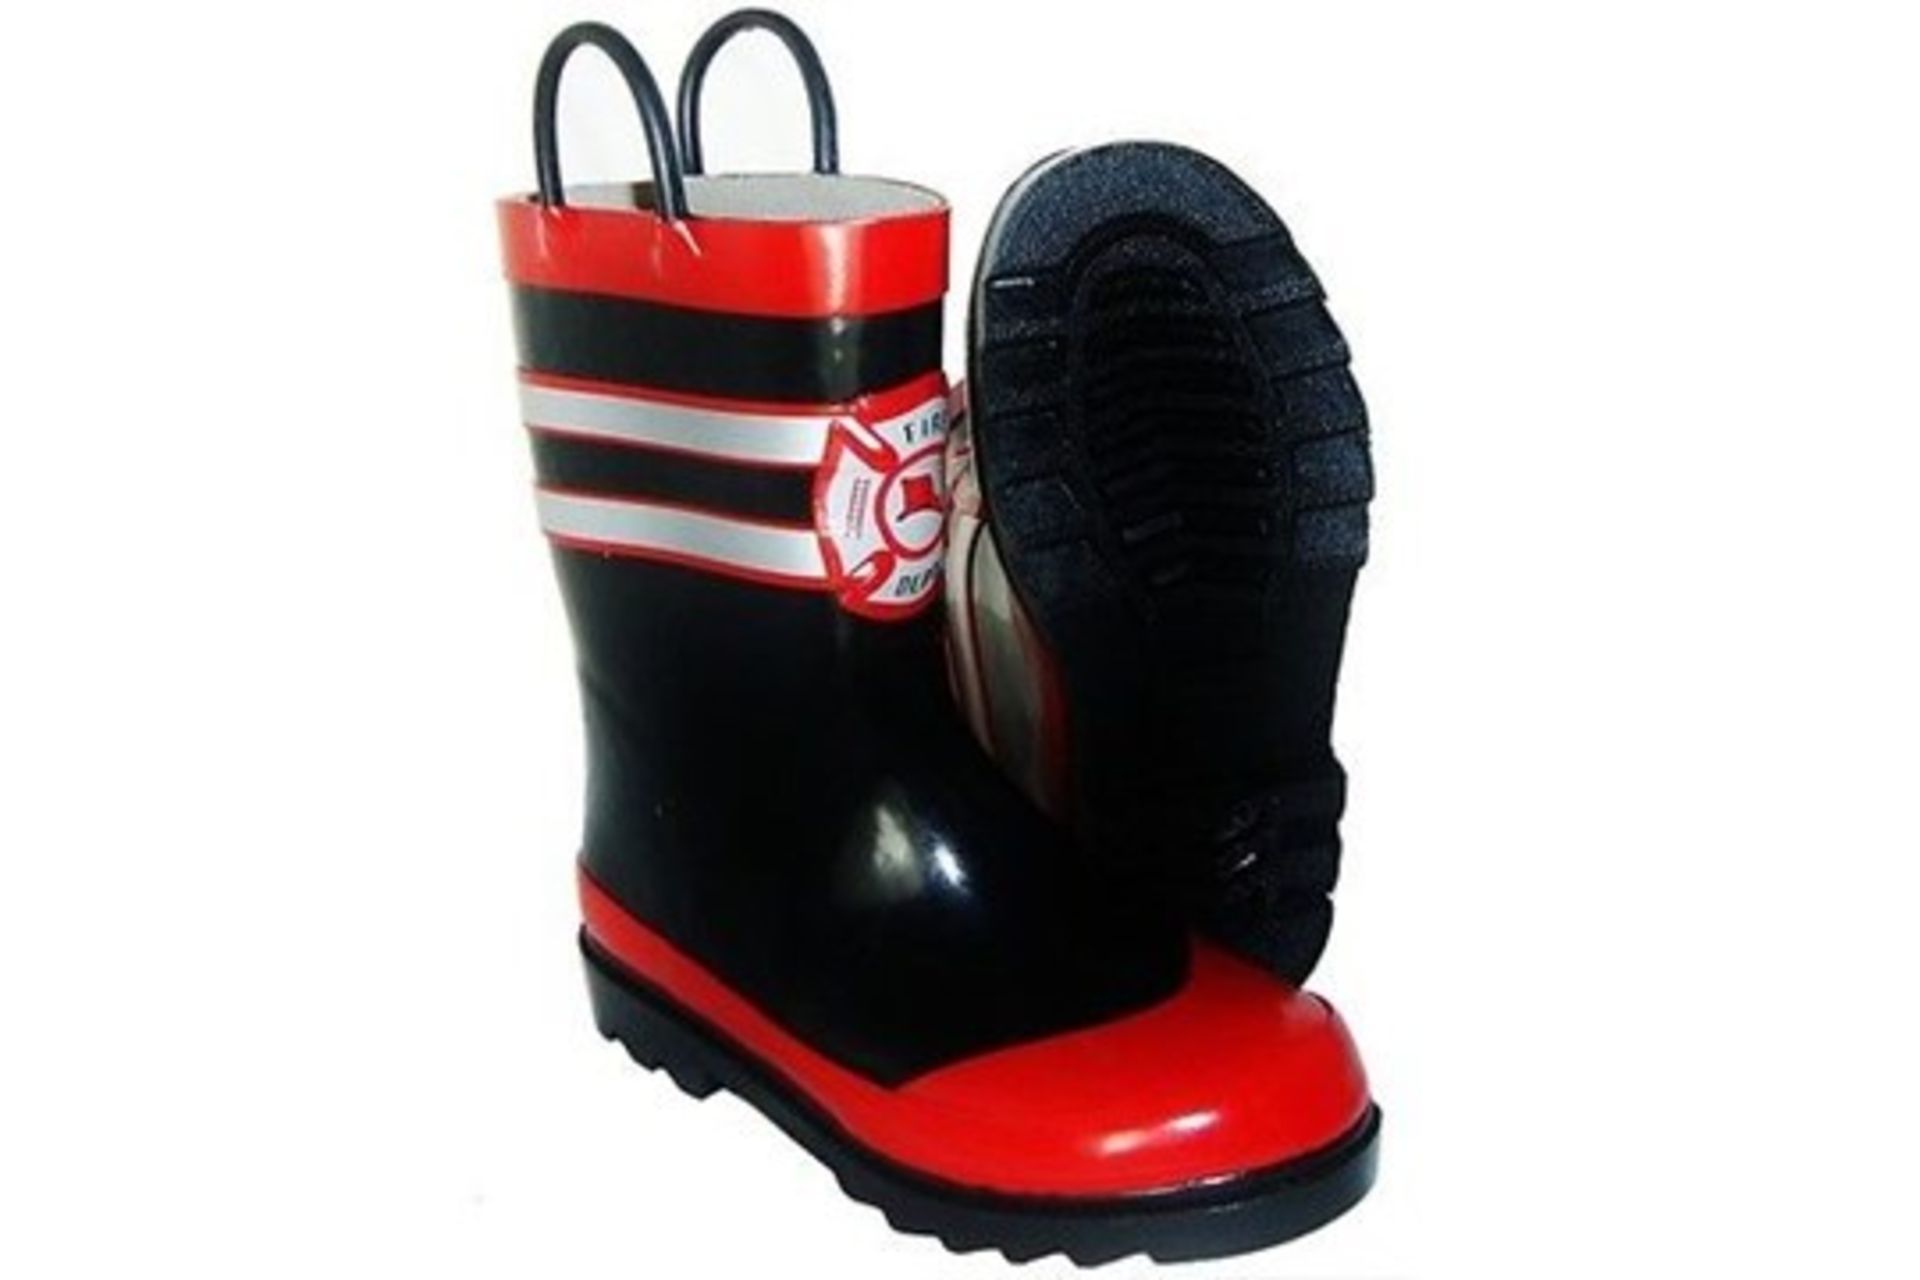 Brand New Pair of Size 13 - 1 Fire Department Black and Red Boys Wellington Boots with Handles